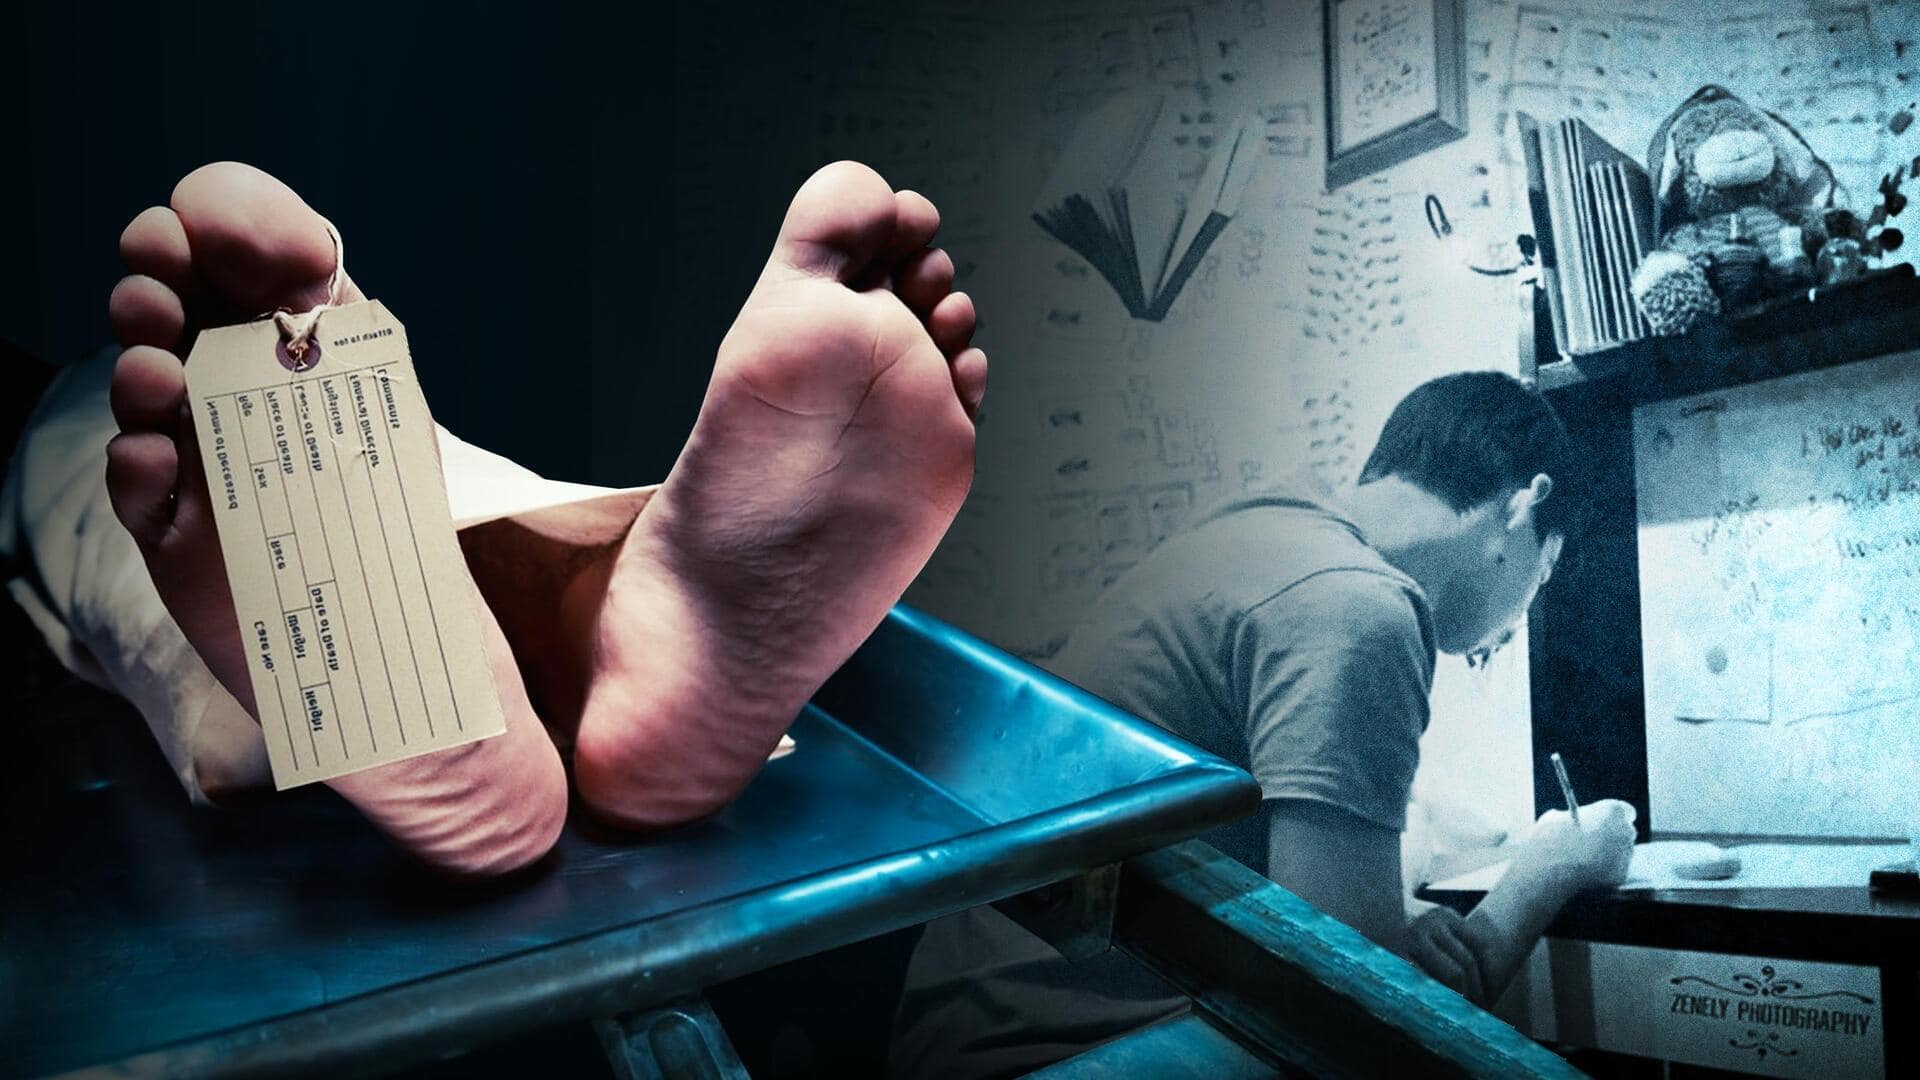 JEE aspirant found dead in Kota, 4th suicide this year